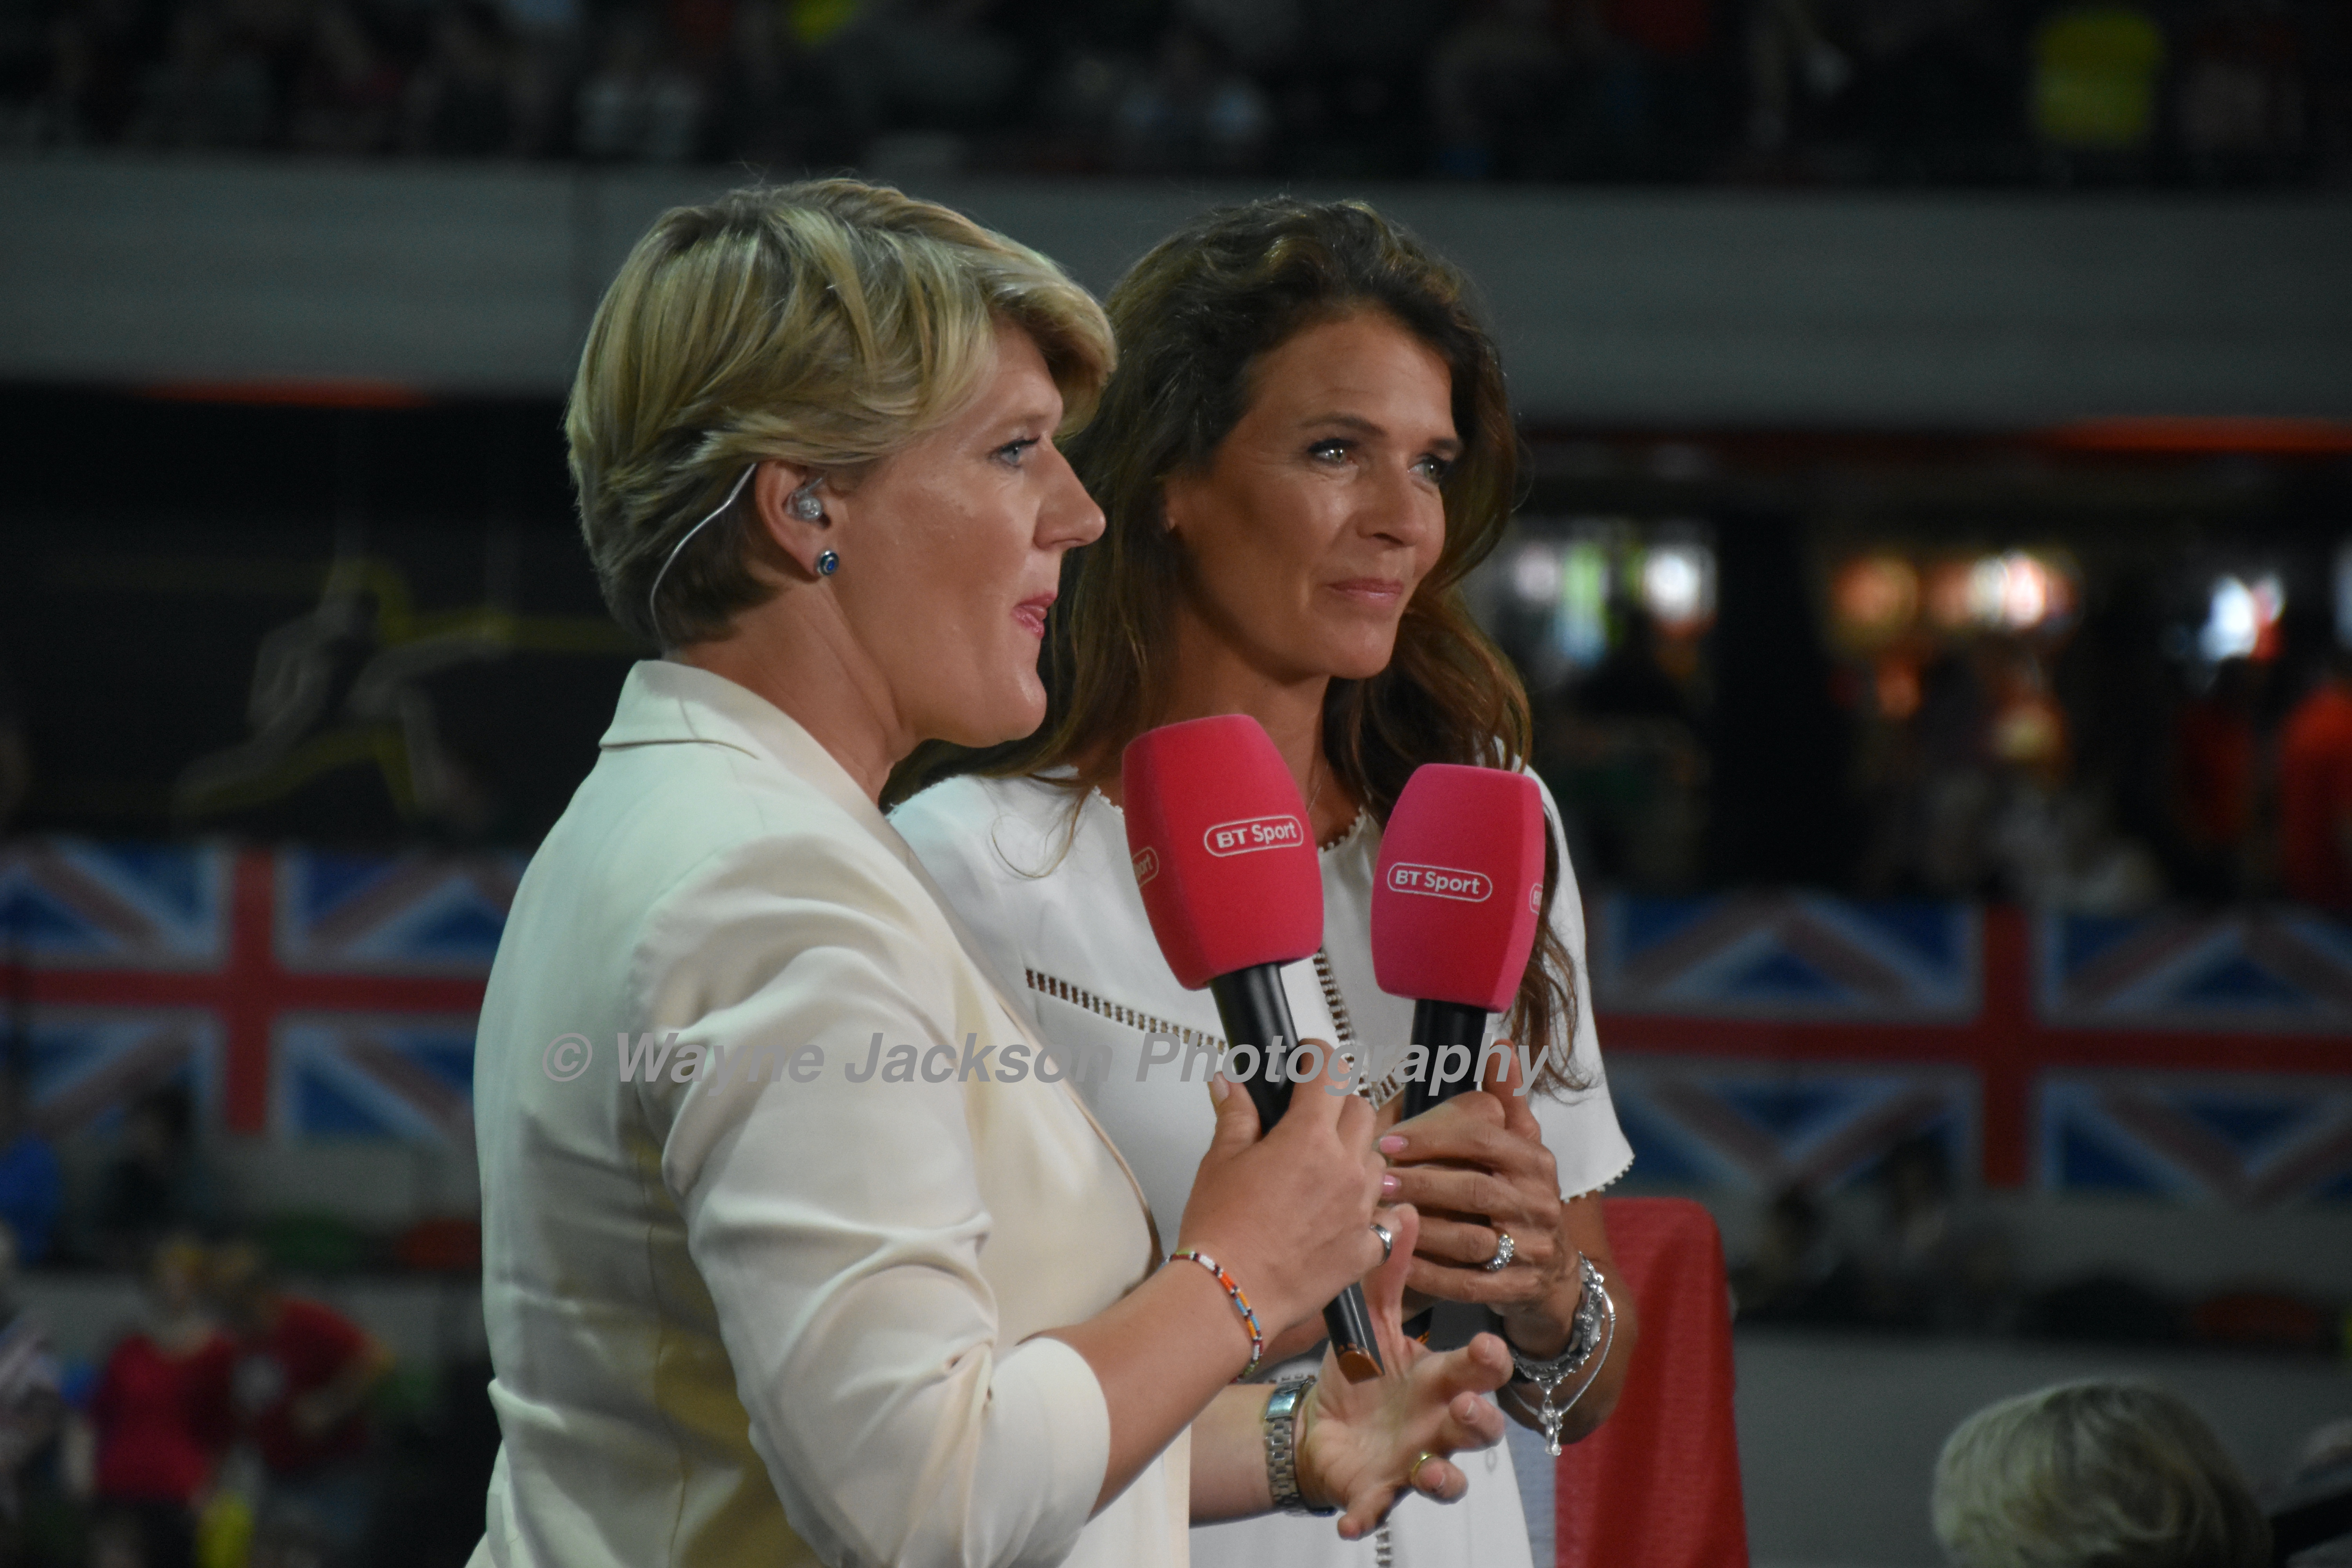 Clare Balding and Annabel Croft